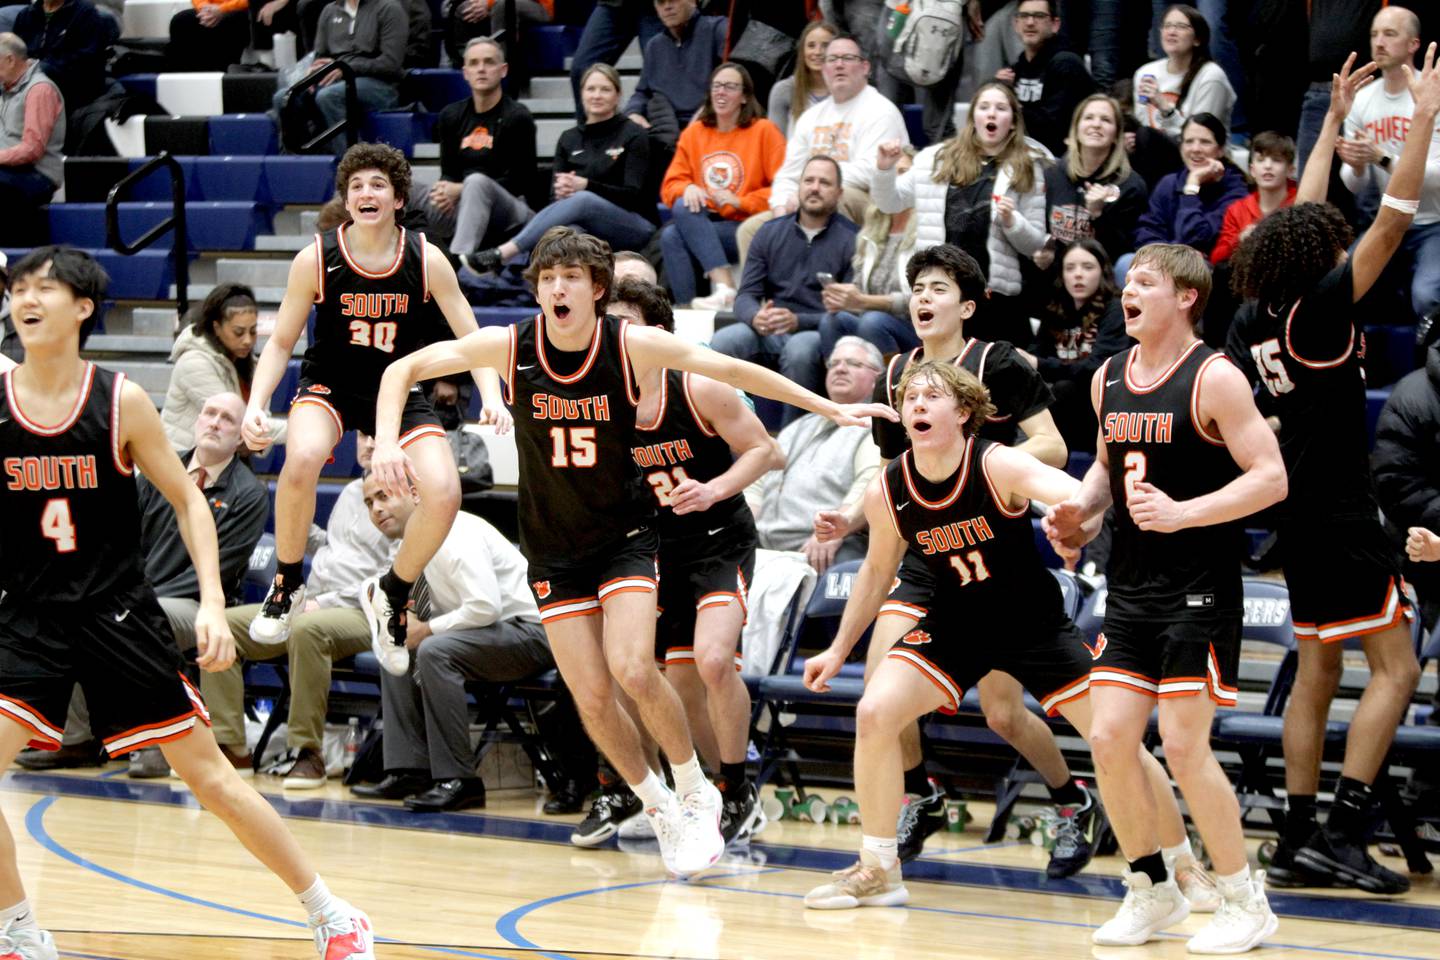 The Wheaton Warrenville South bench erupts as they clinch their win over Lake Park in Roselle on Friday, Feb. 10, 2023.